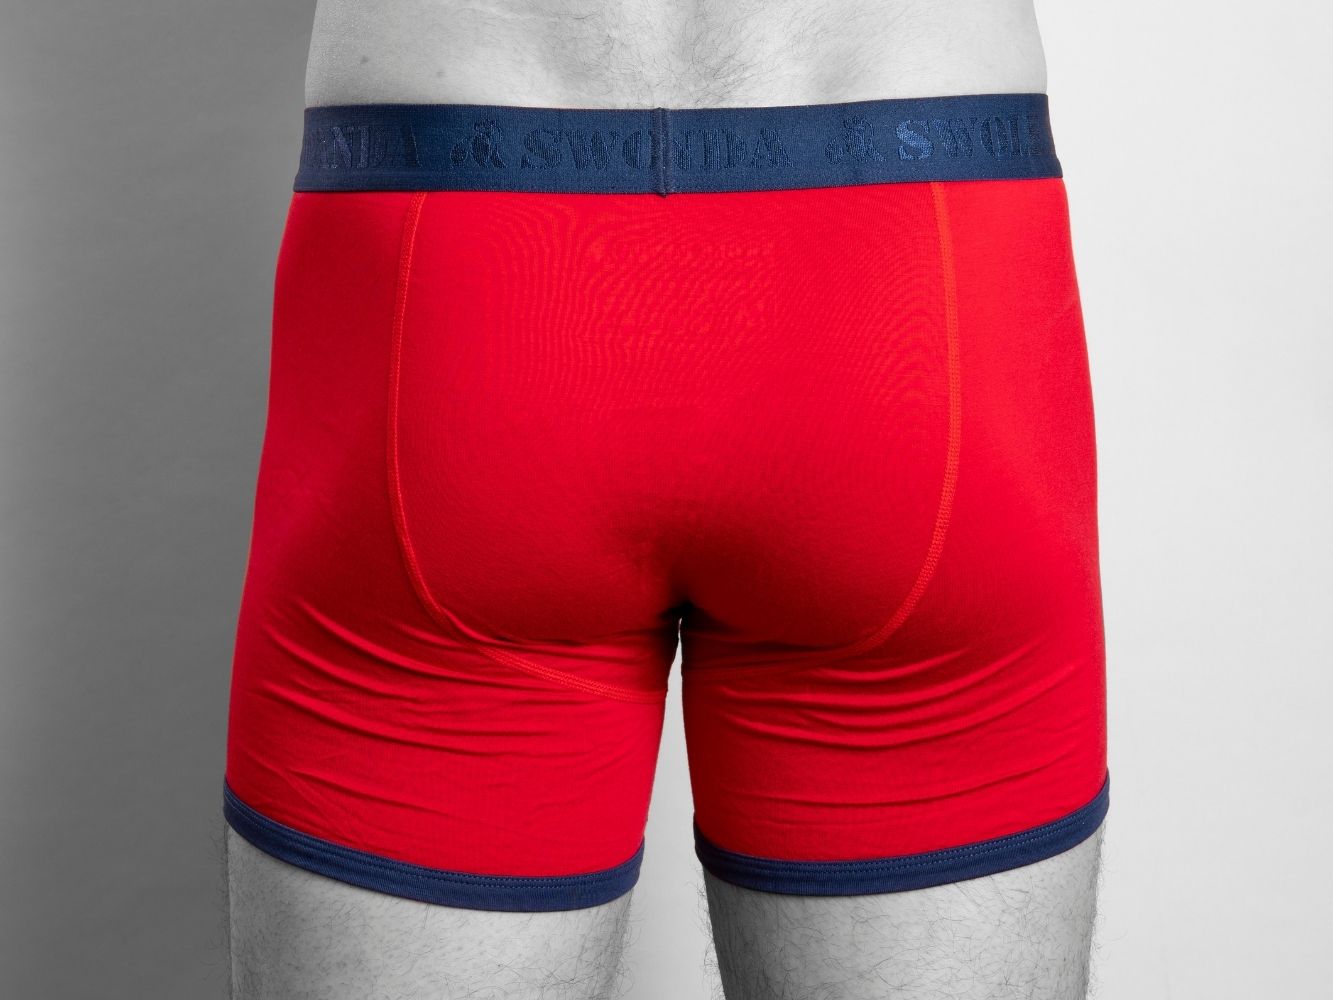 underwear-bamboo-boxers-red-blue-band-3.jpg